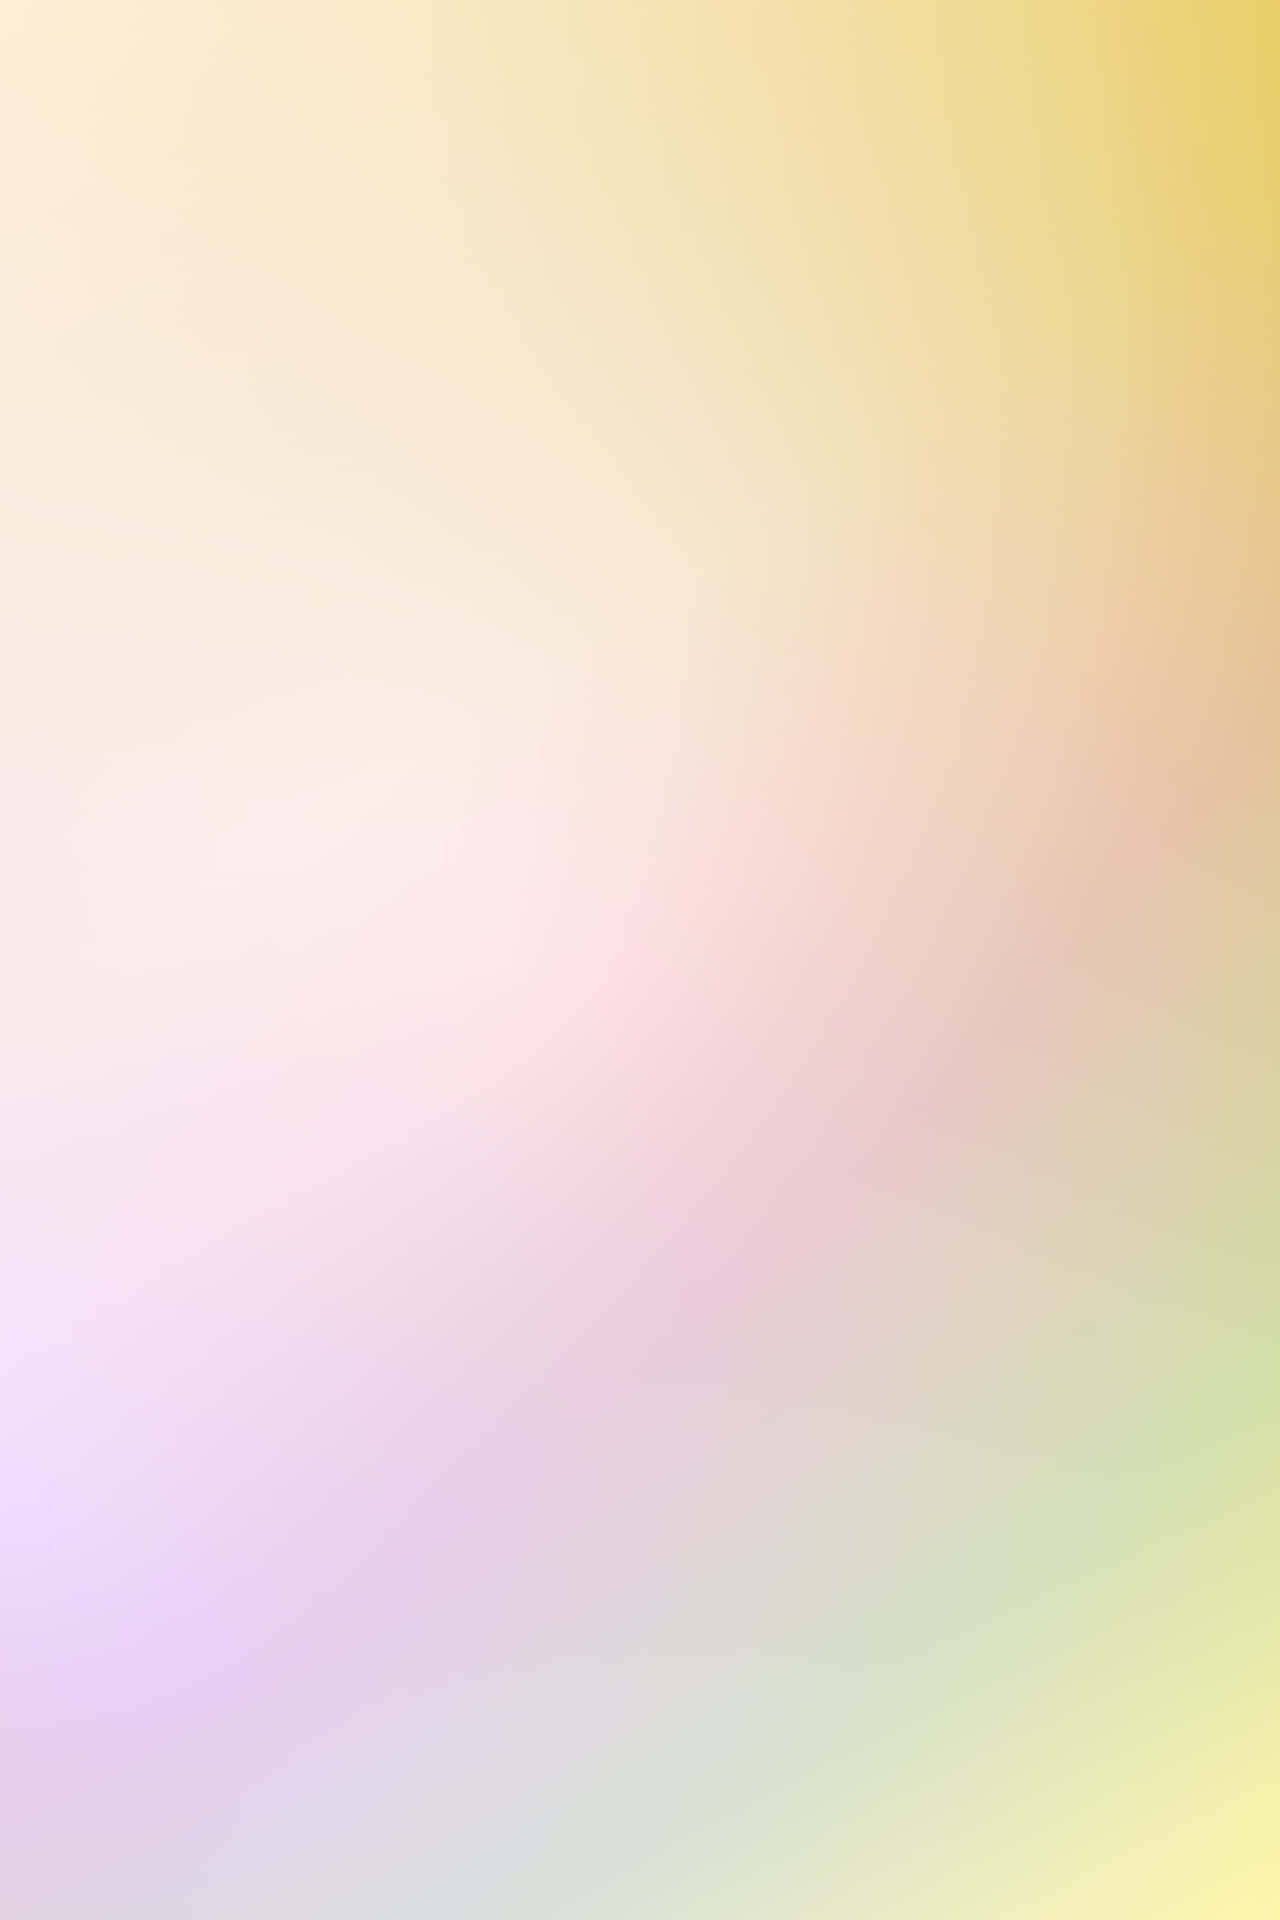 Soothing Blend of Colors in a Pastel Gradient Background